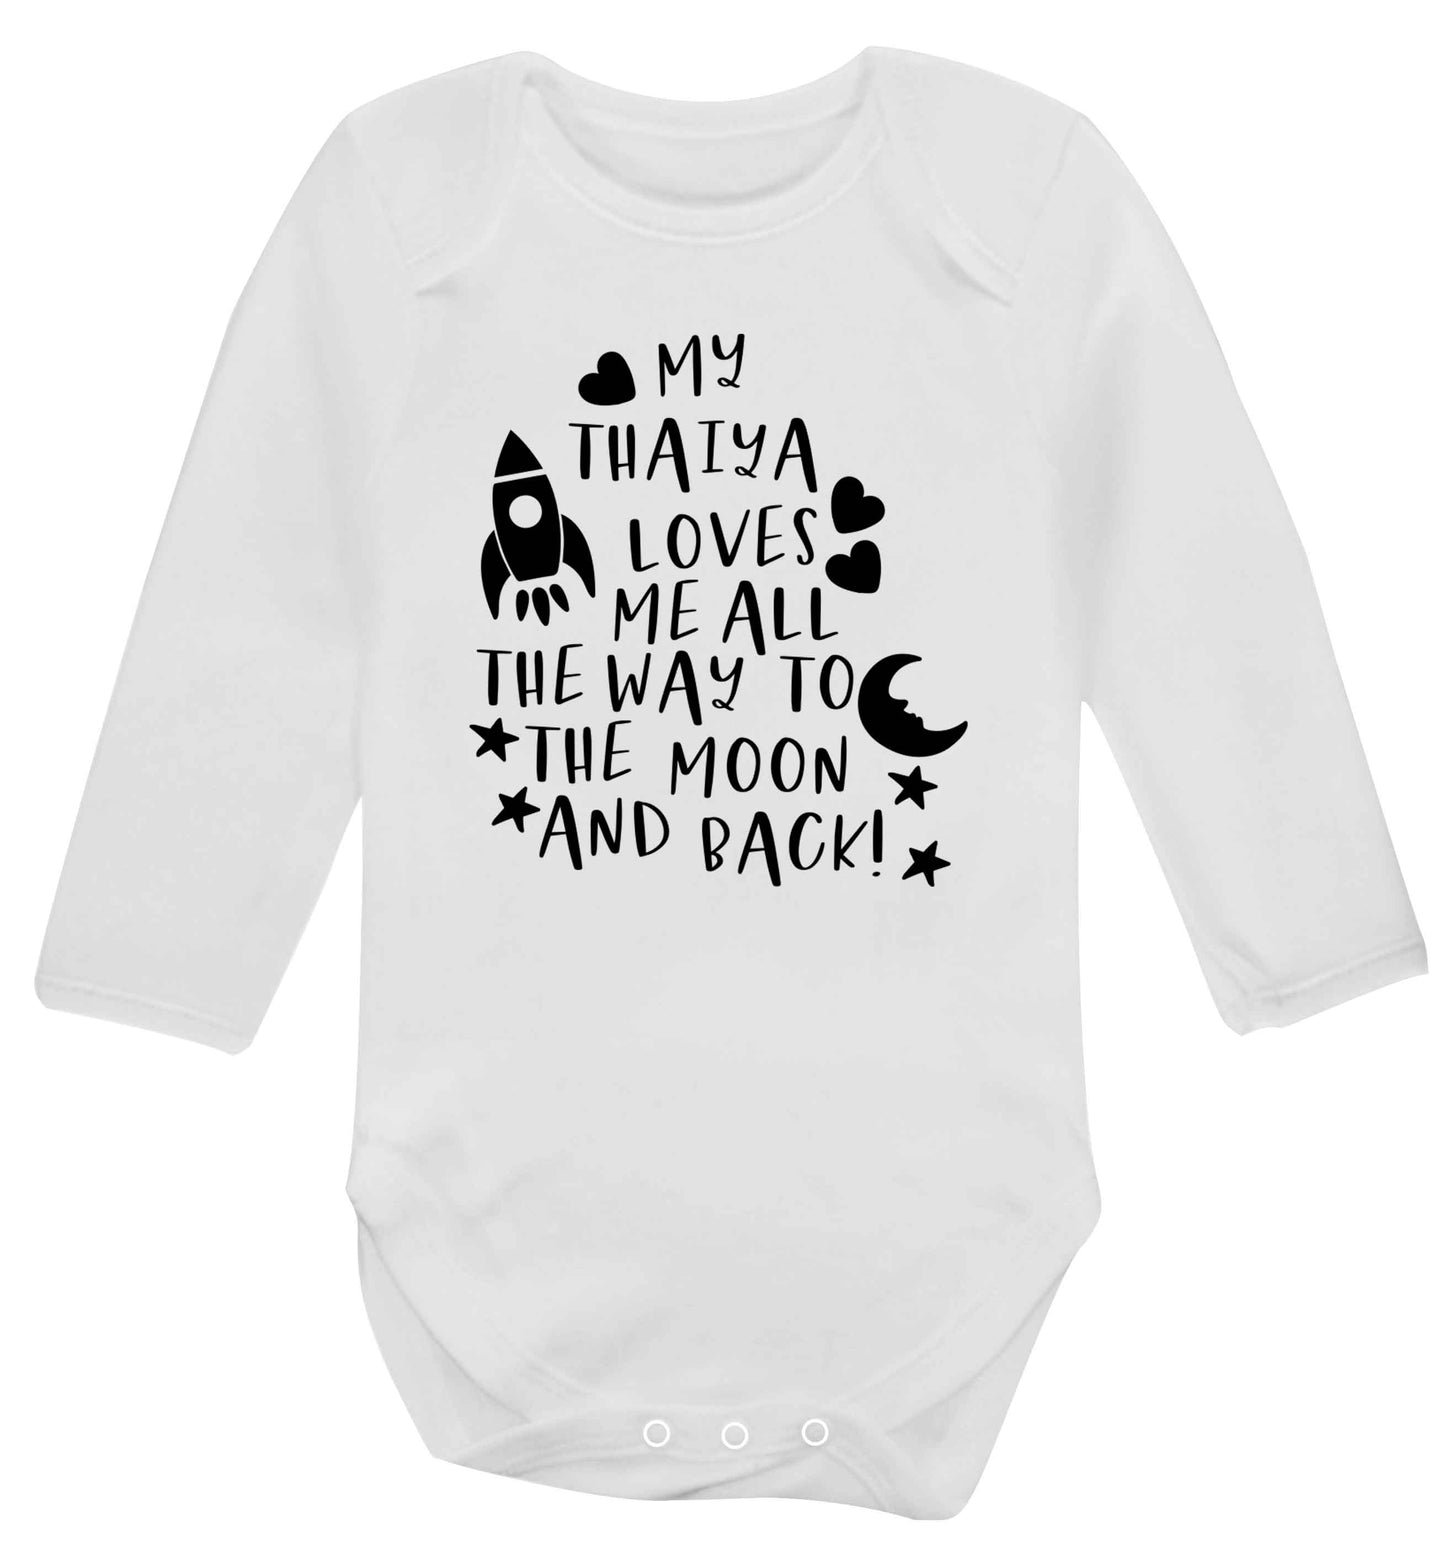 My thaiya loves me all the way to the moon and back Baby Vest long sleeved white 6-12 months